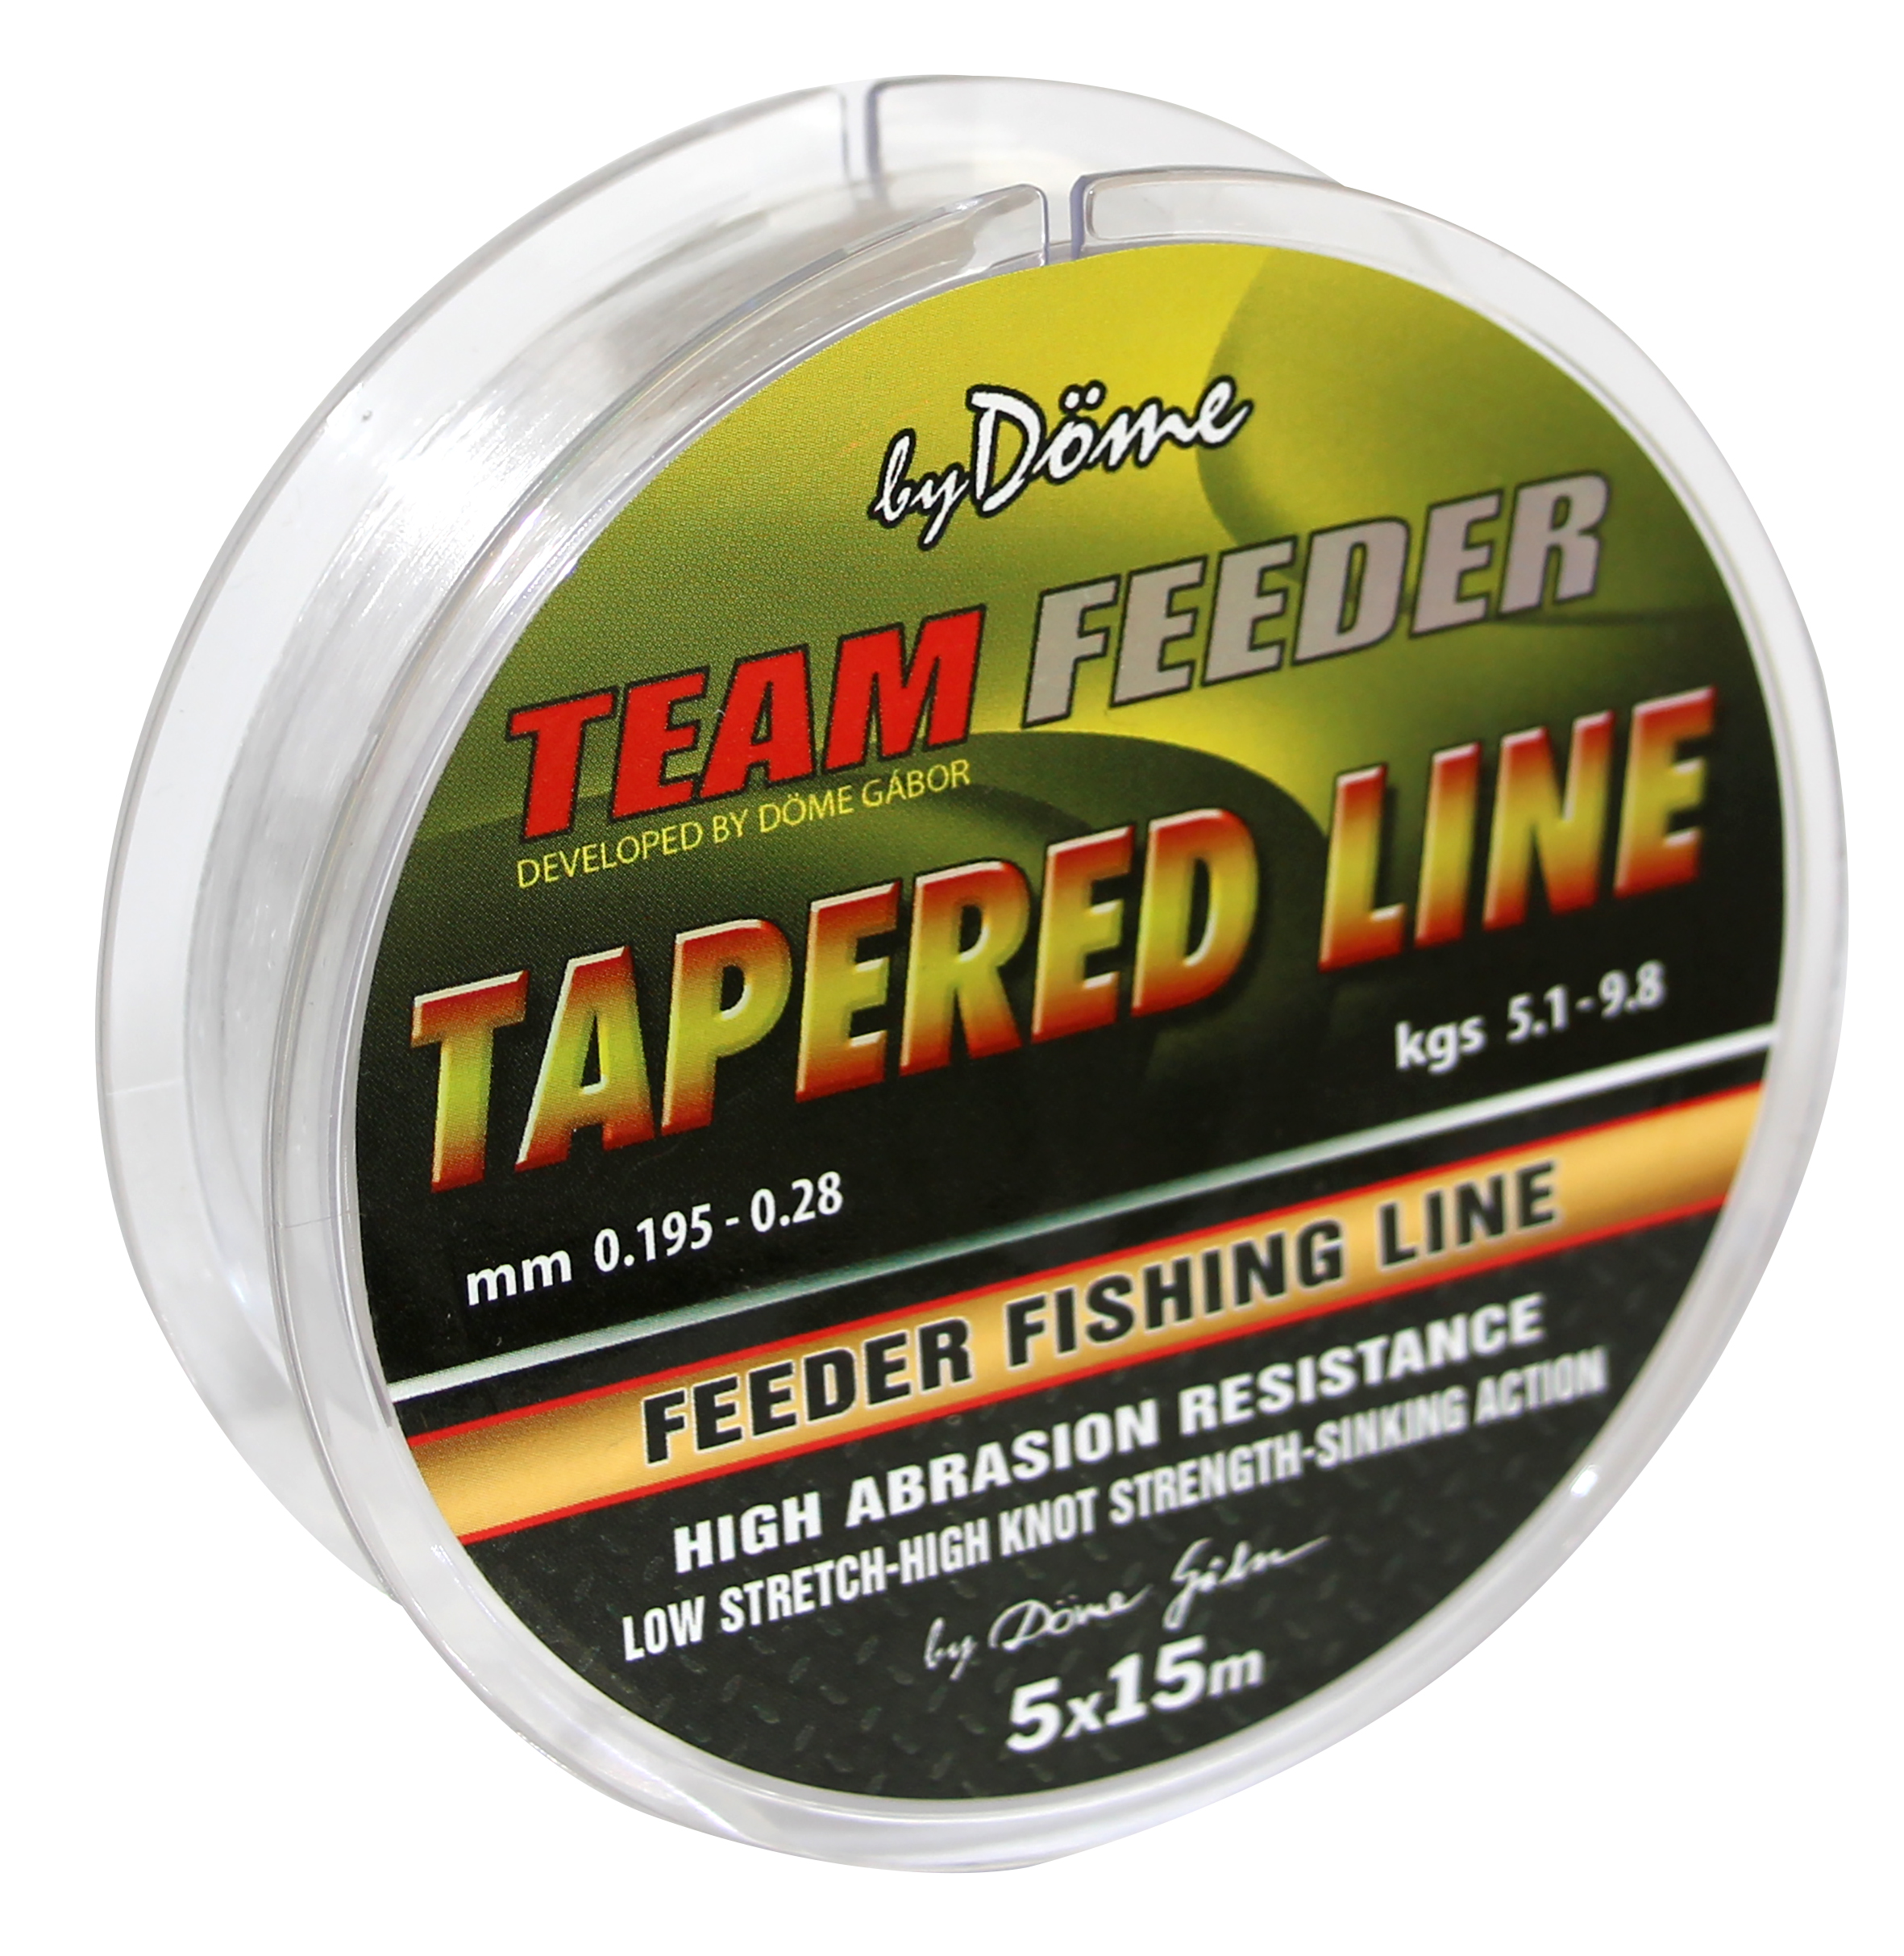 BY DÖME TF TAPERED LEADER 15M X5 0.195-0.28